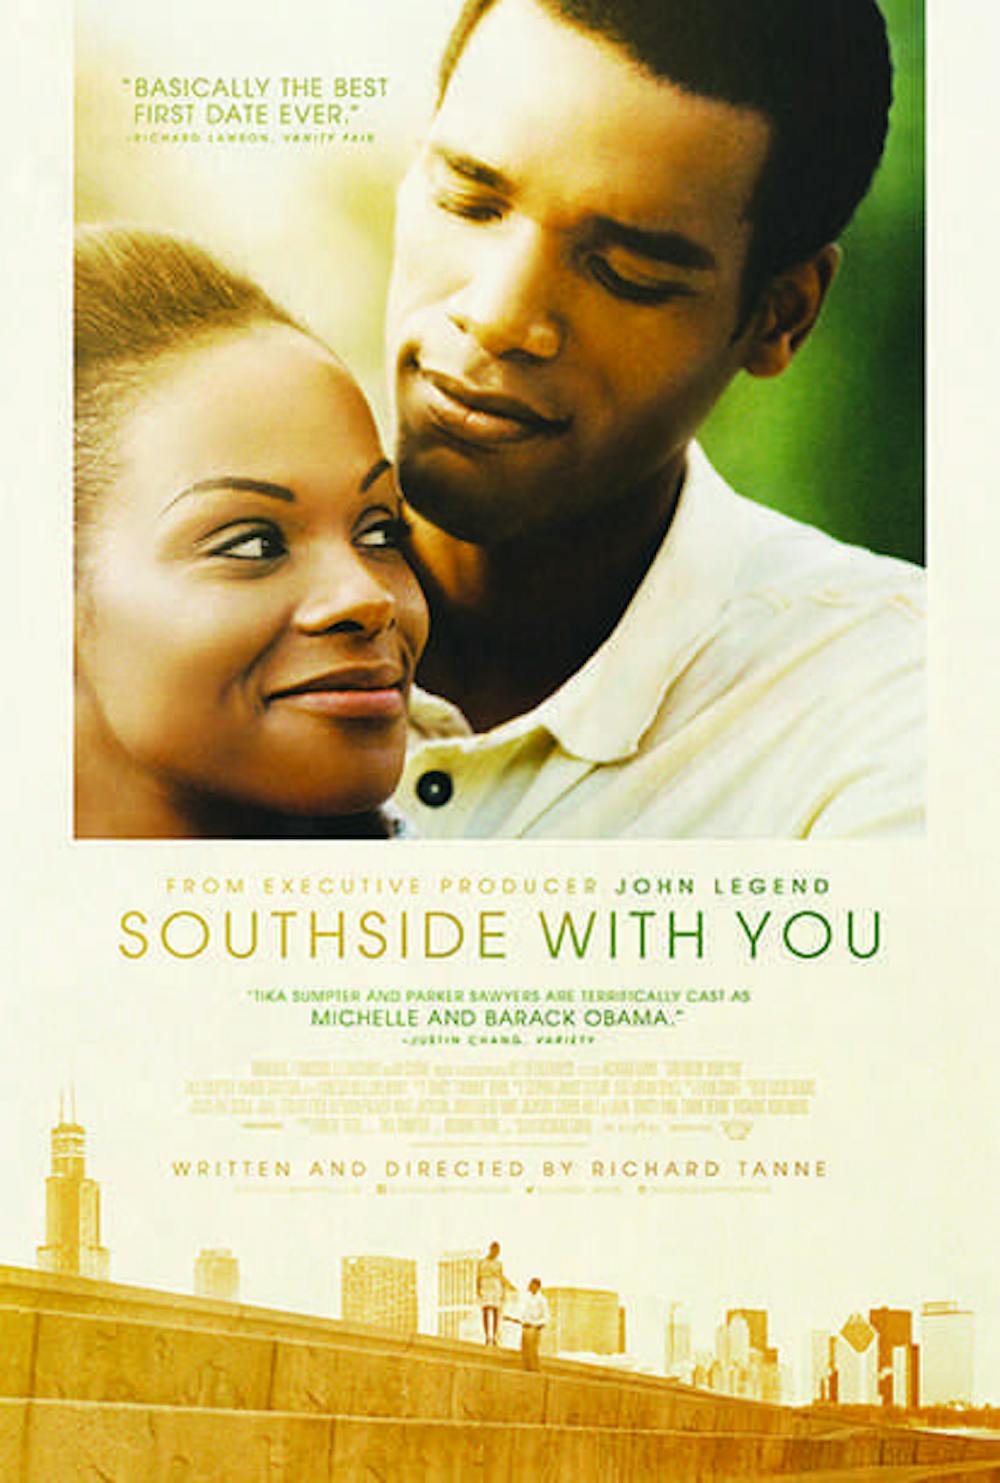 “Southside with You” offers a glimpse into Barack and Michelle Obama’s lives before they were the President and First Lady of the United States.